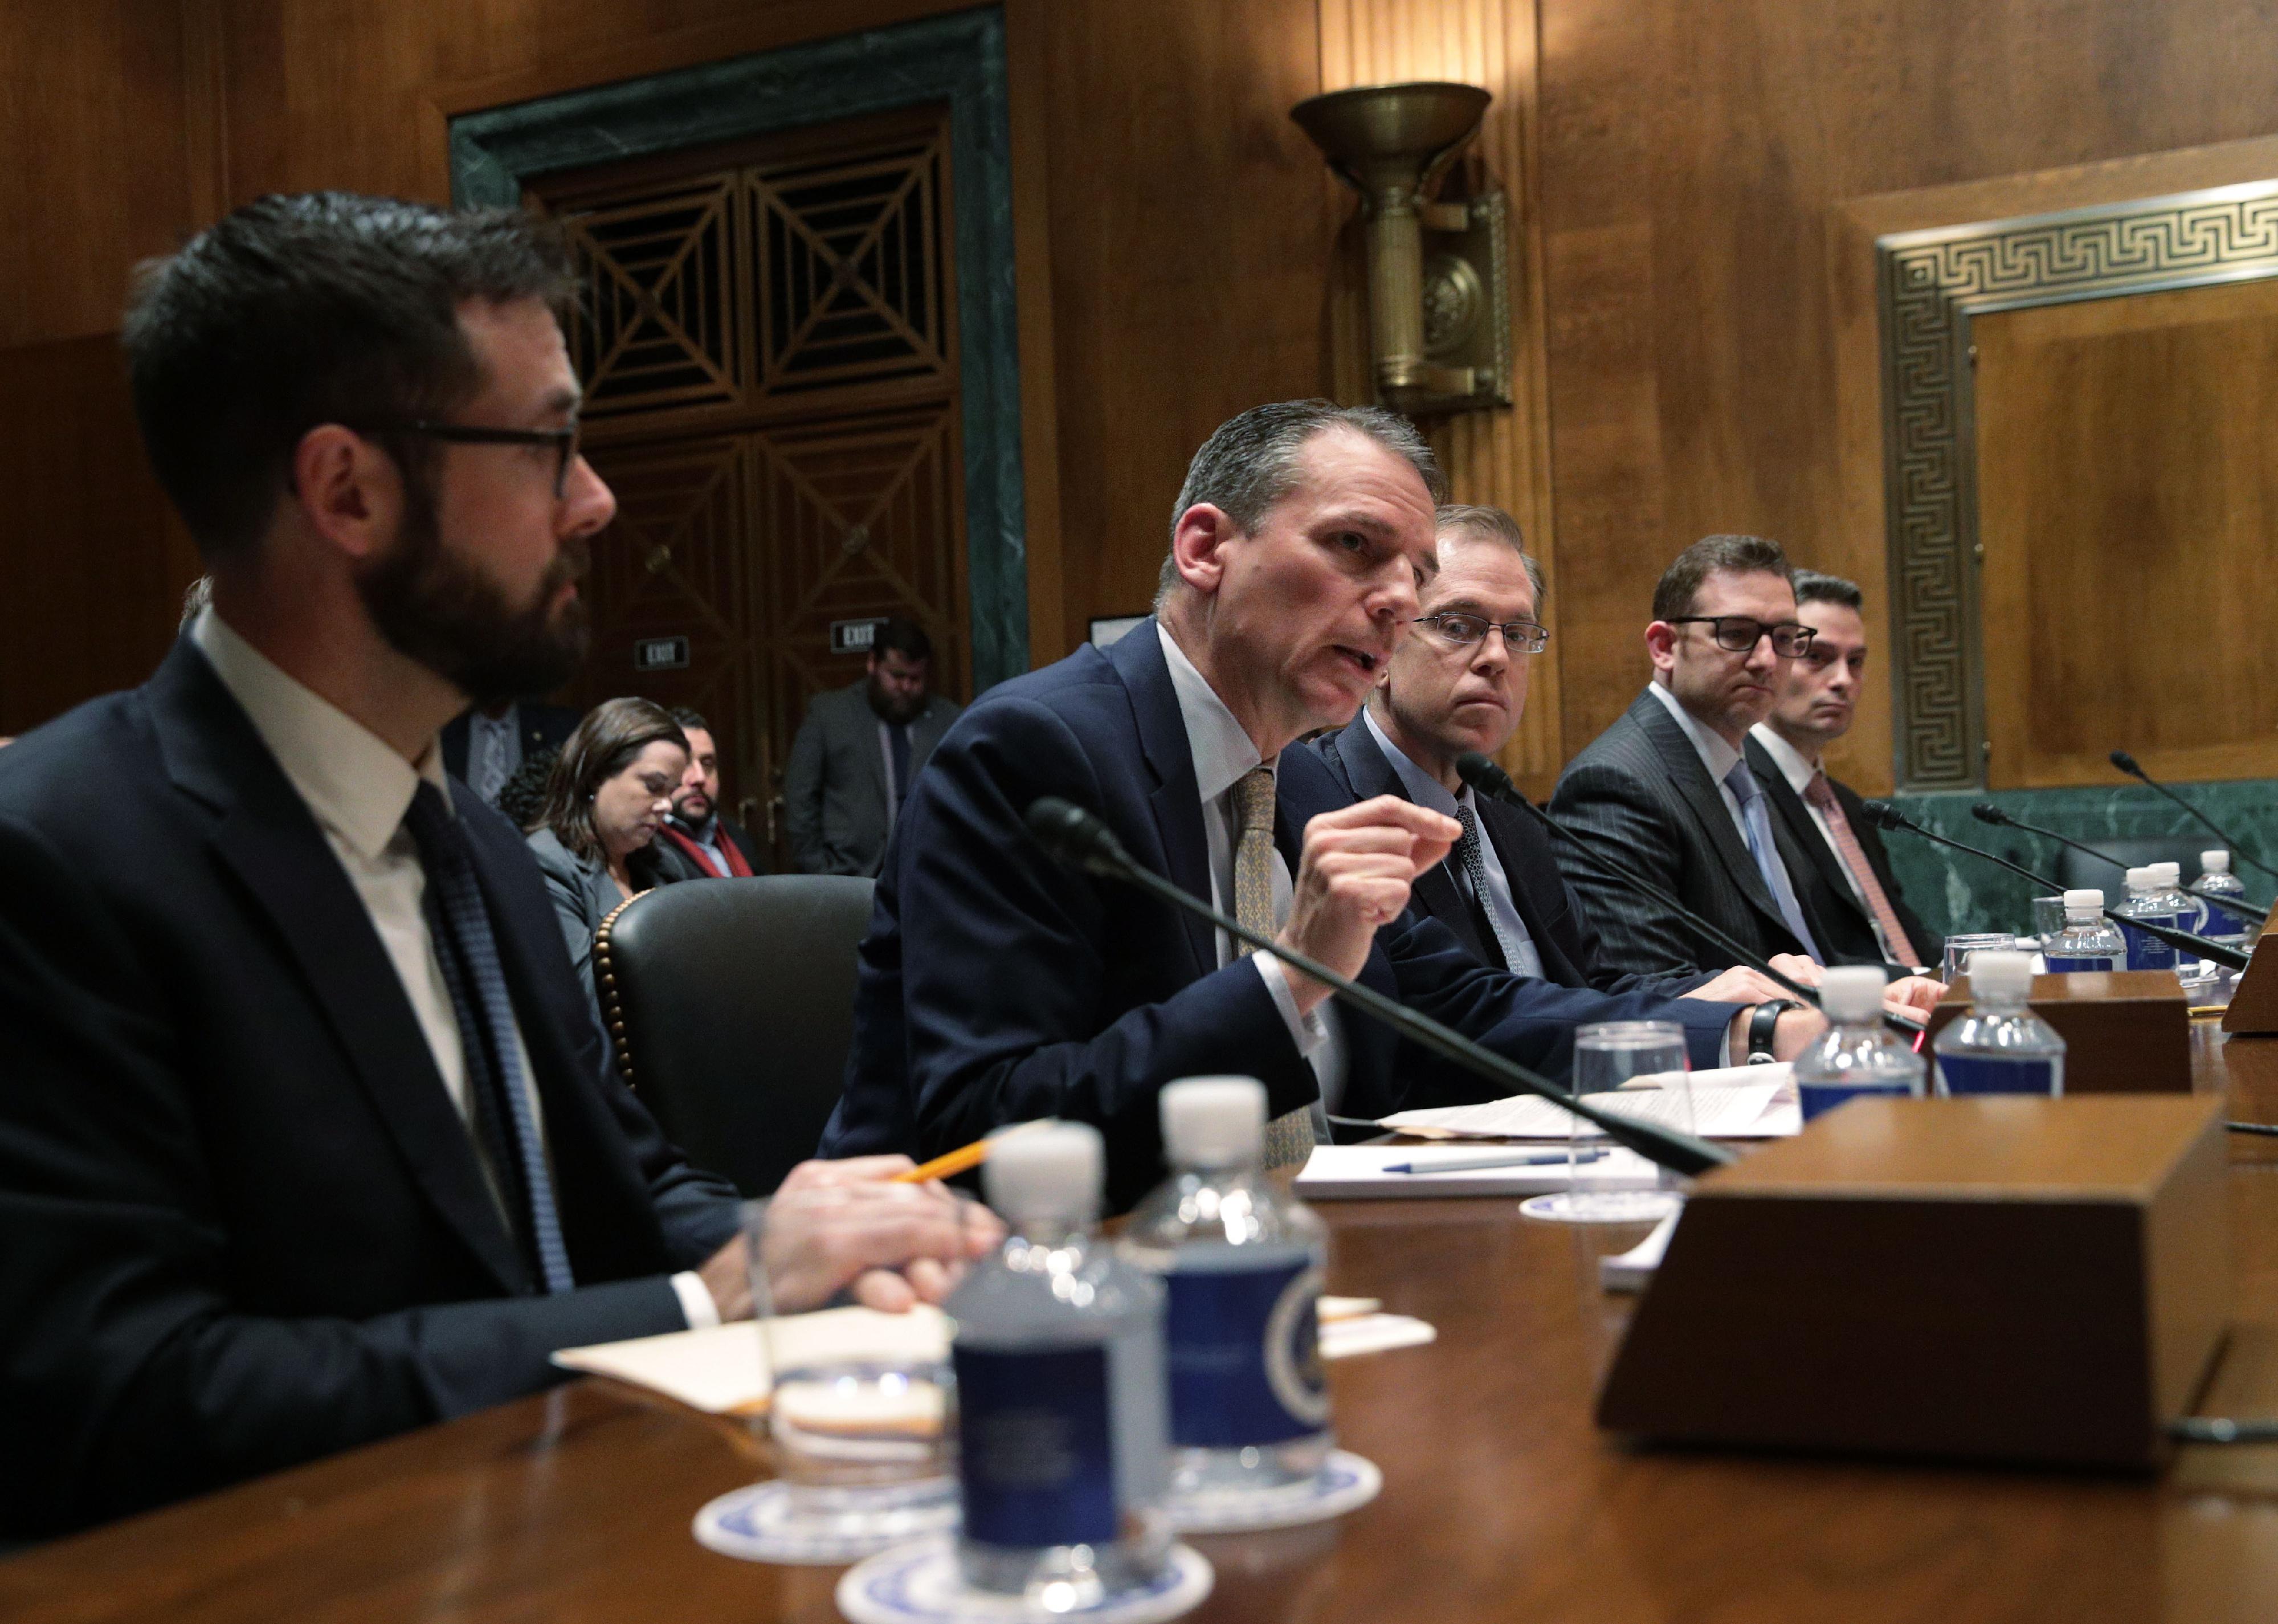 A row of men testifying during a hearing before the Senate Judiciary Committee in Washington, D.C.